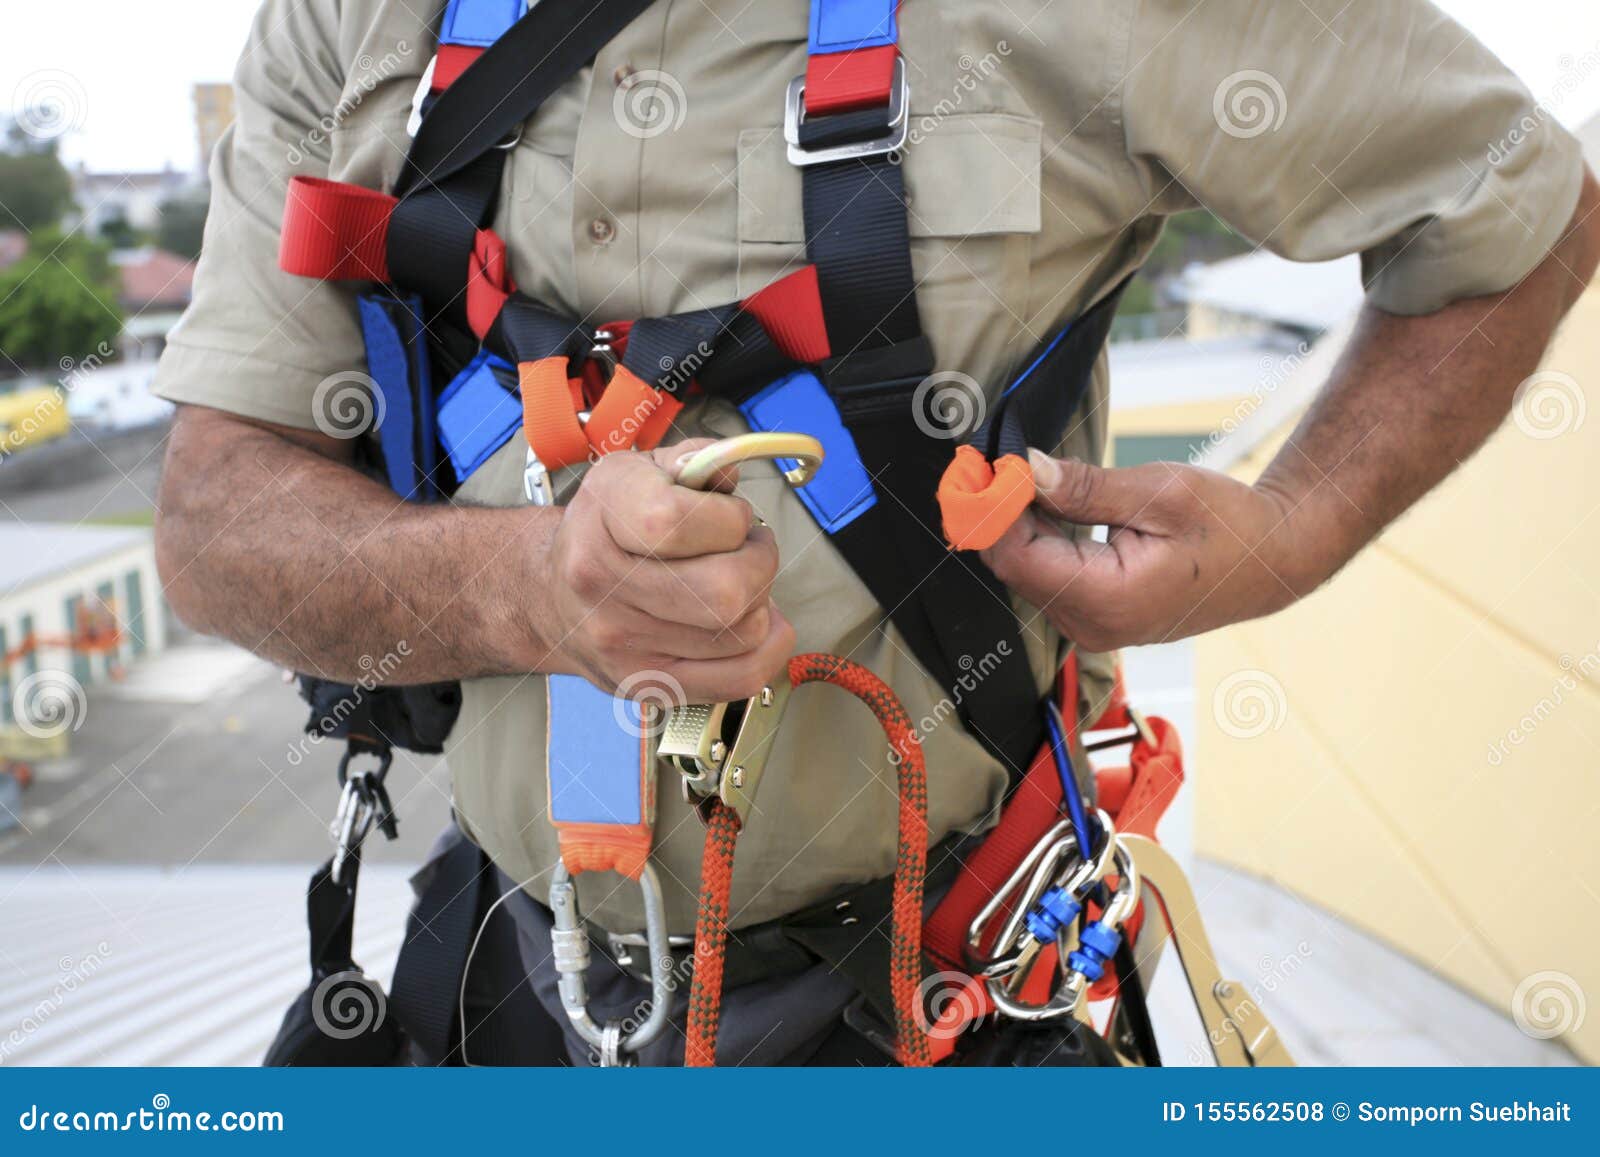 https://thumbs.dreamstime.com/z/close-up-pic-male-industrial-rope-access-worker-wearing-fall-arrest-fall-restraint-safety-protection-harness-close-up-pic-155562508.jpg